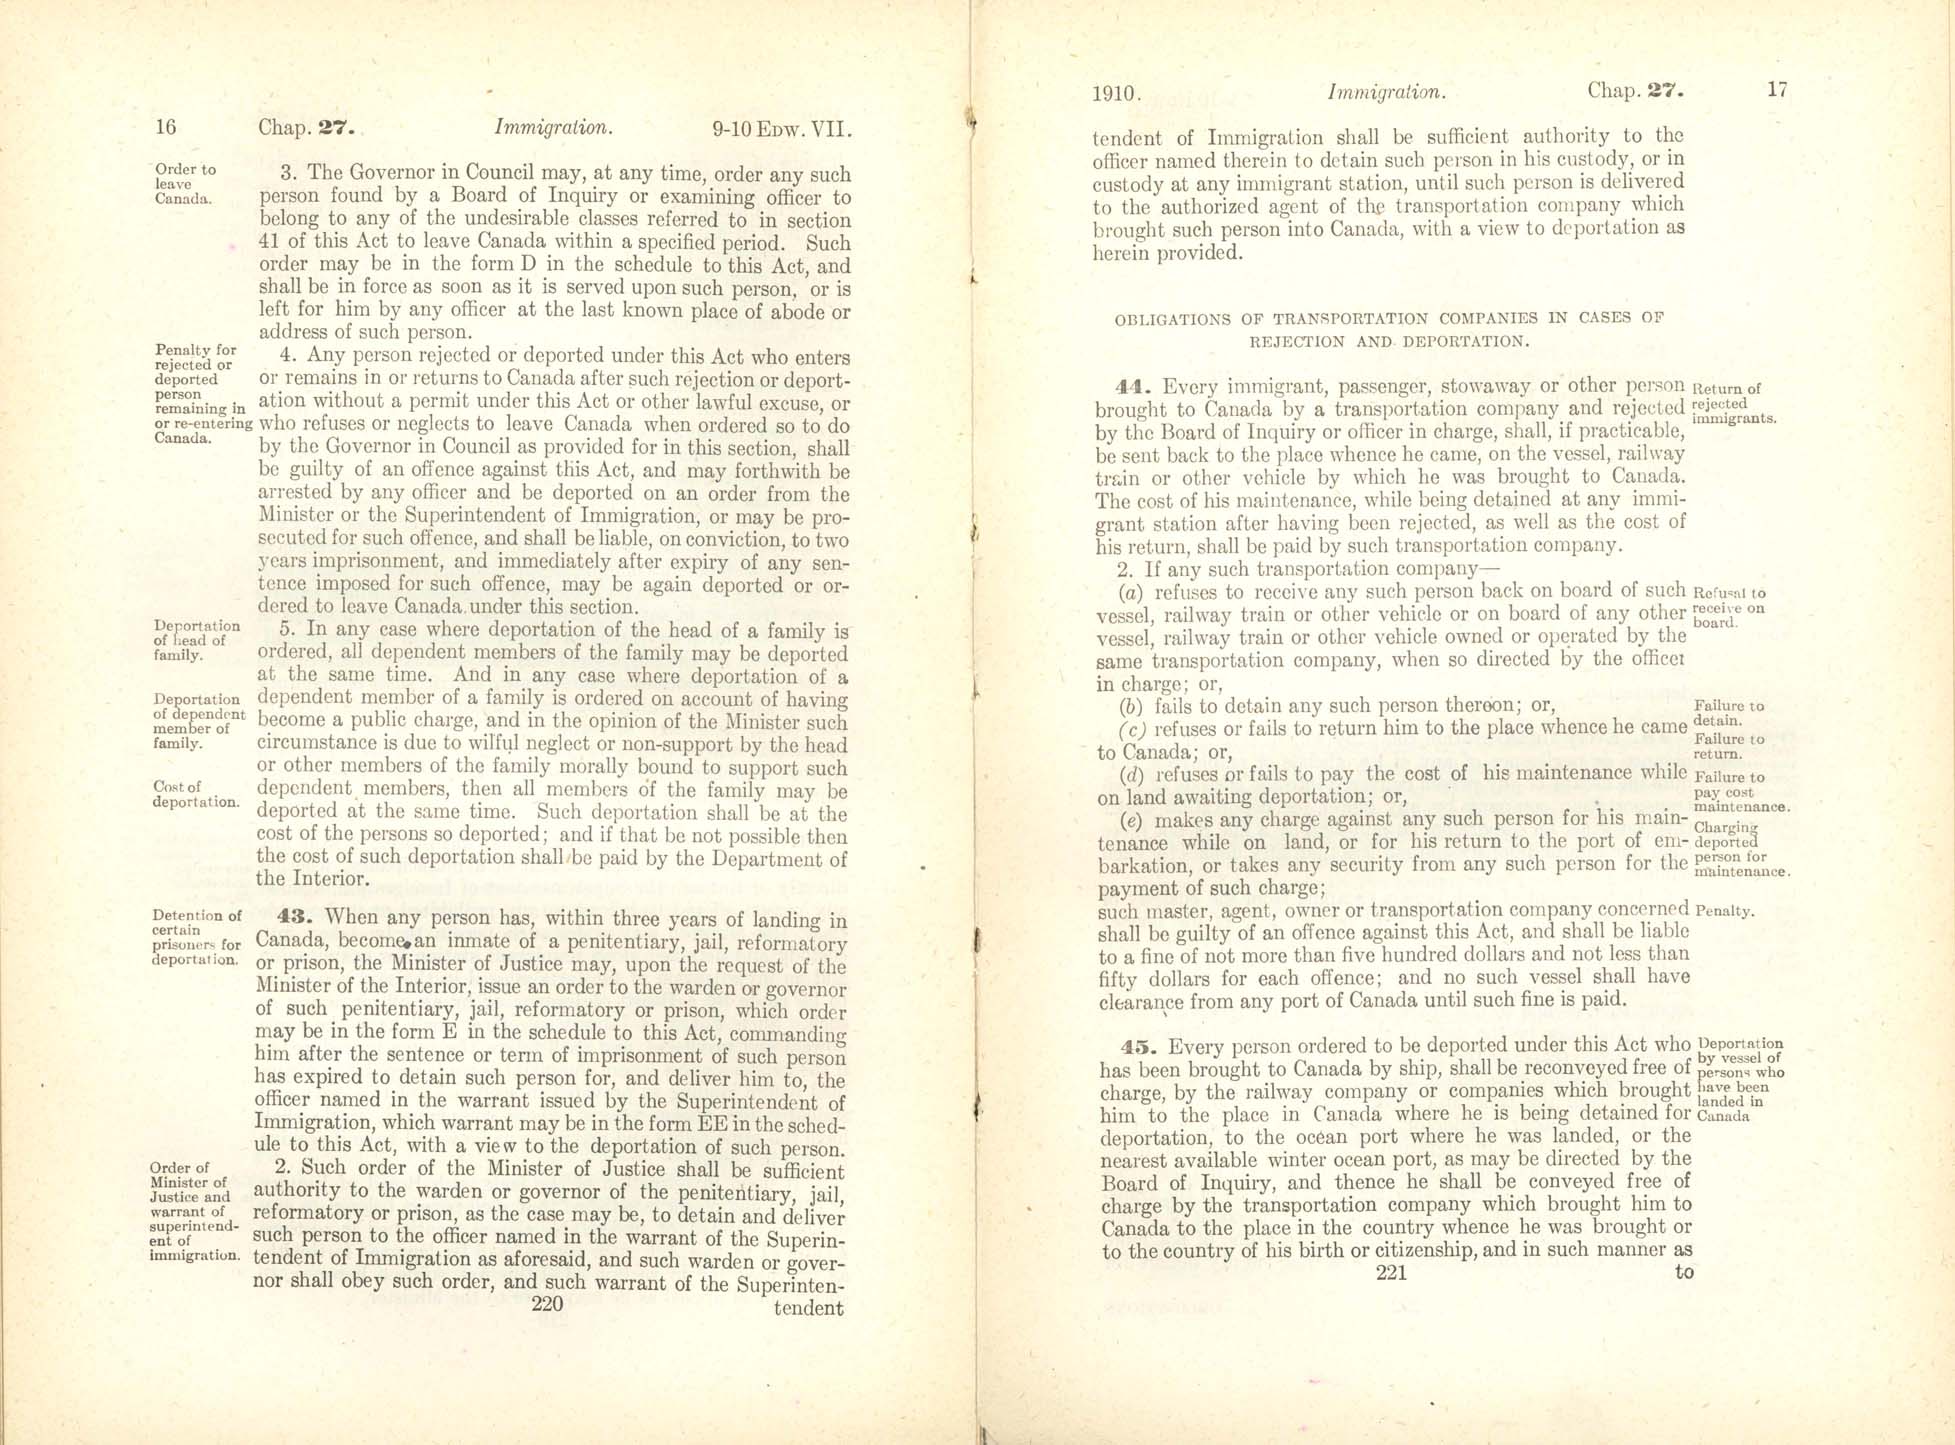 Chap. 27 Page 220, 221 Immigration Act, 1910